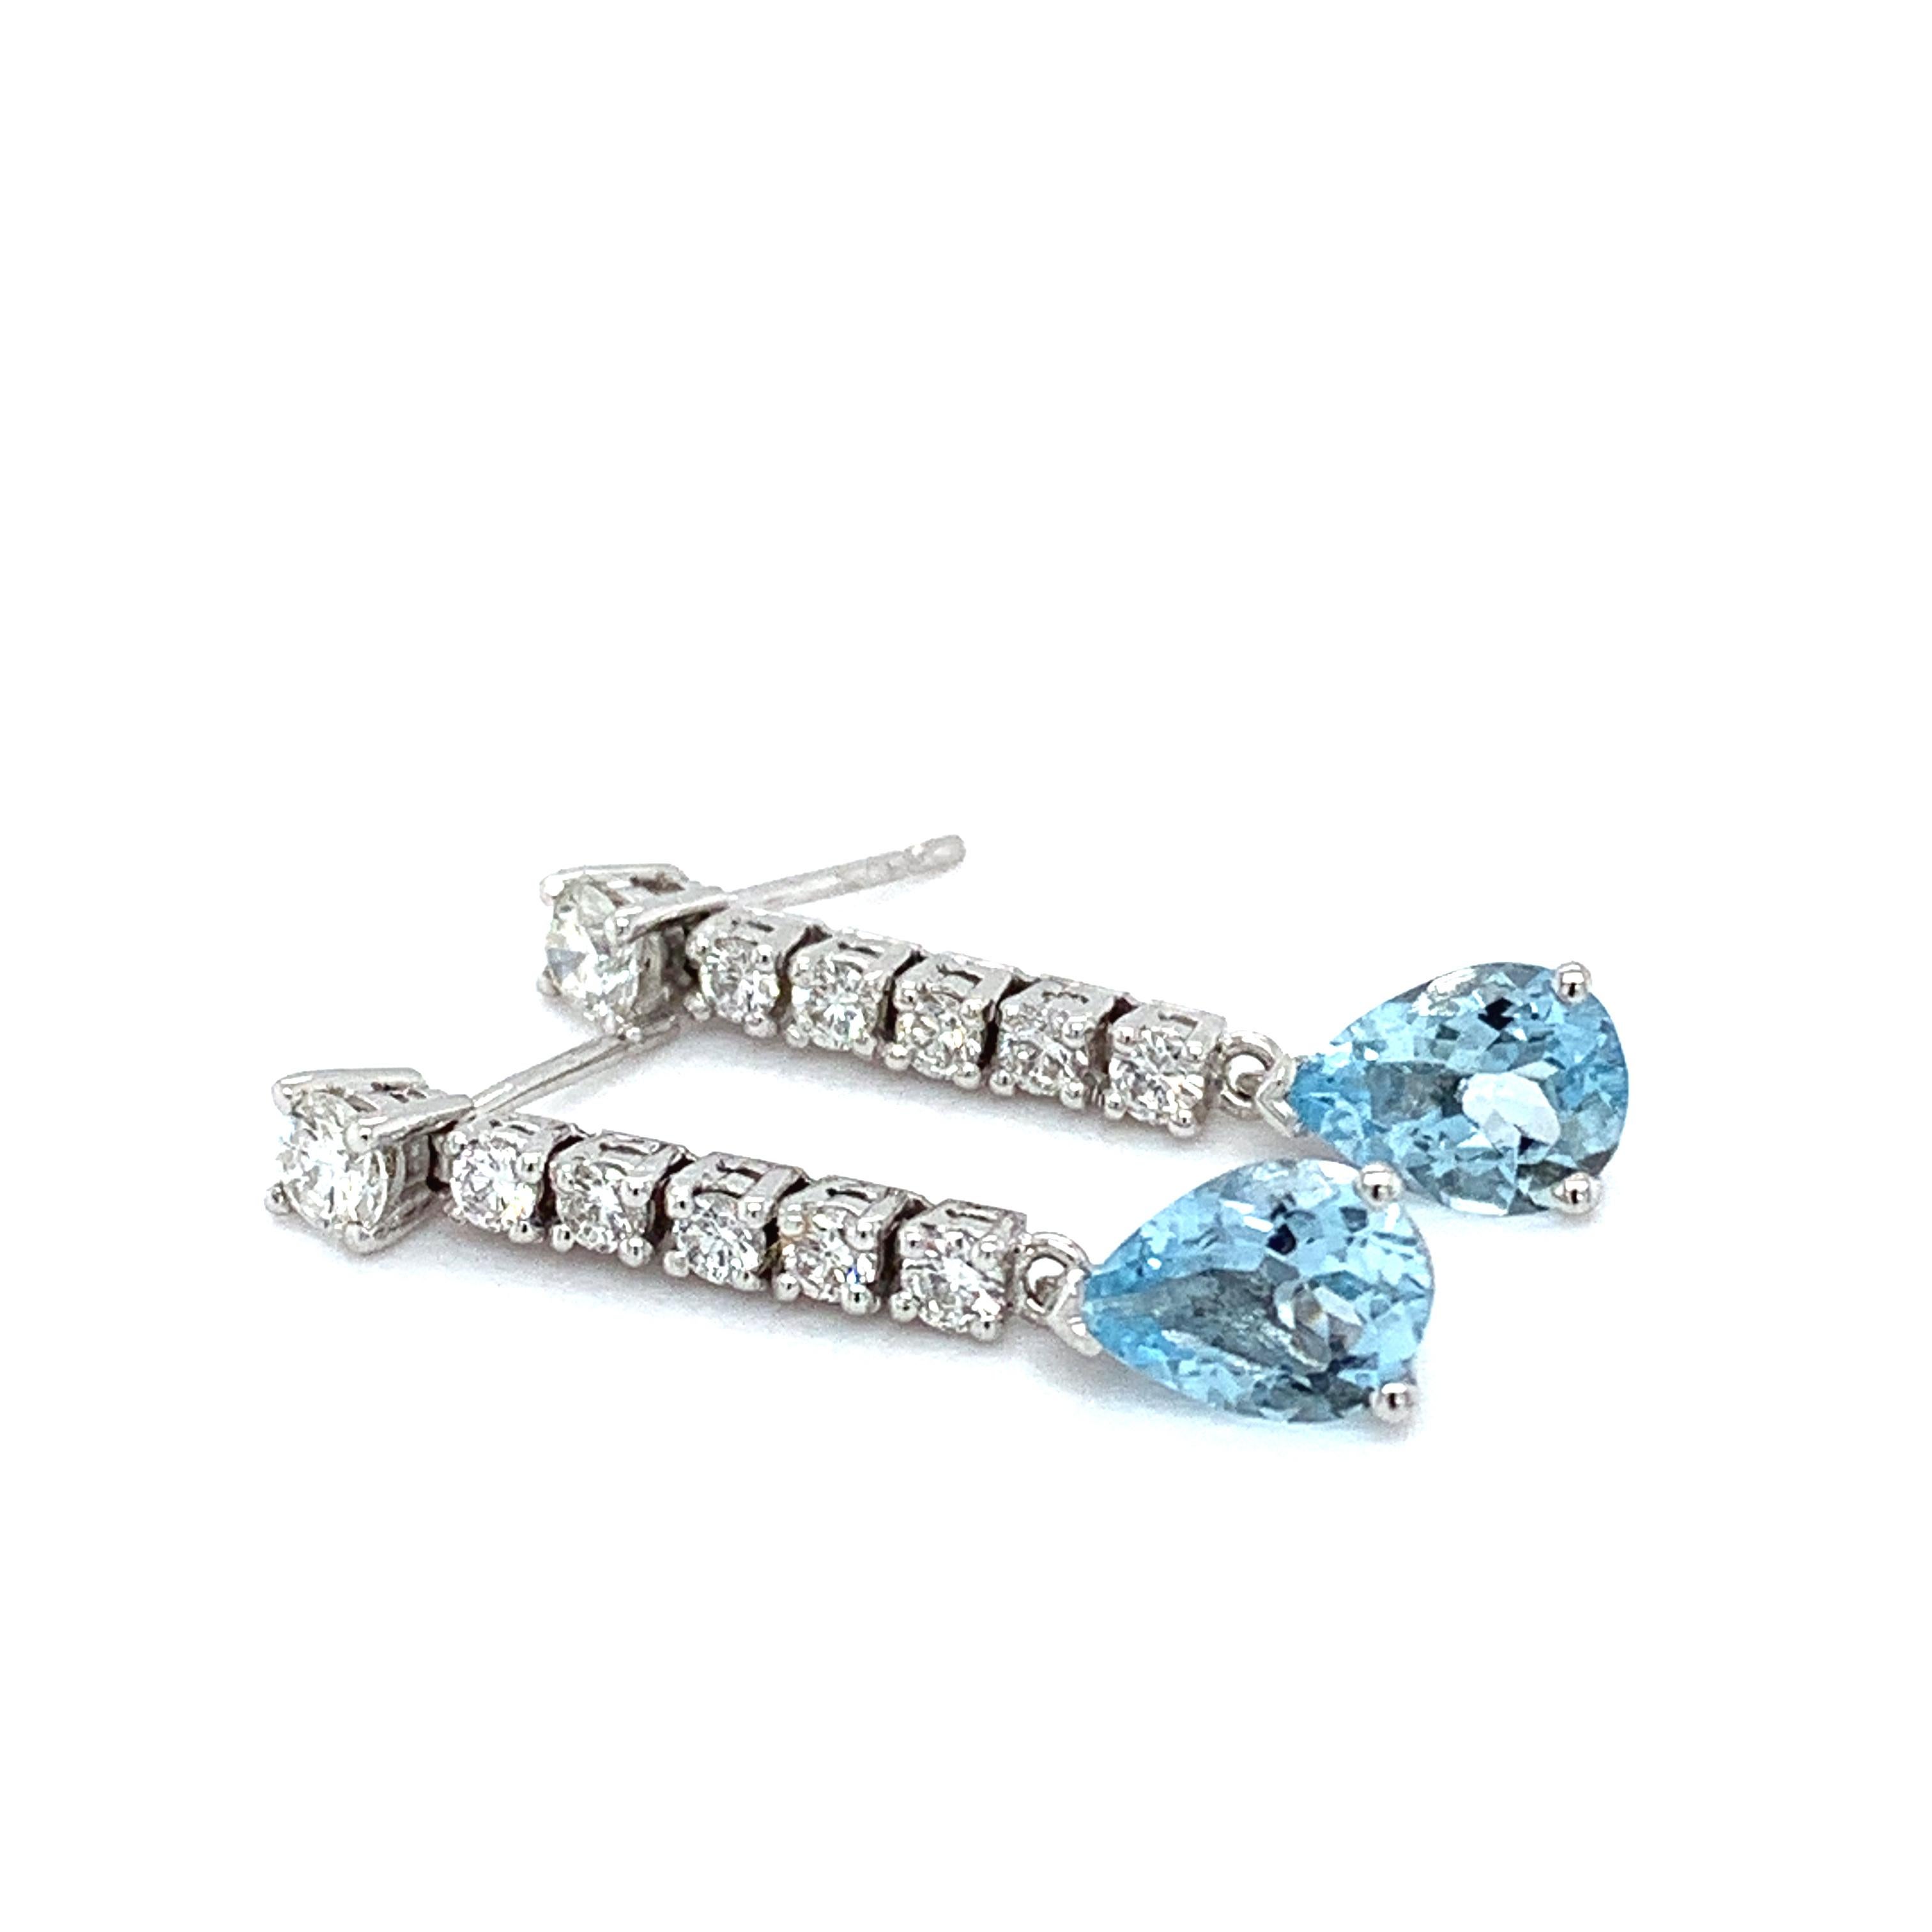 Aquamarine and diamonds drop earrings 18k white gold.
Art deco style drop earrings composed of aquamarine pear shaped with round brilliant diamonds drop earrings set in 18k white gold. 
Aquamarine pear shaped gemstone total weight 2.80ct total